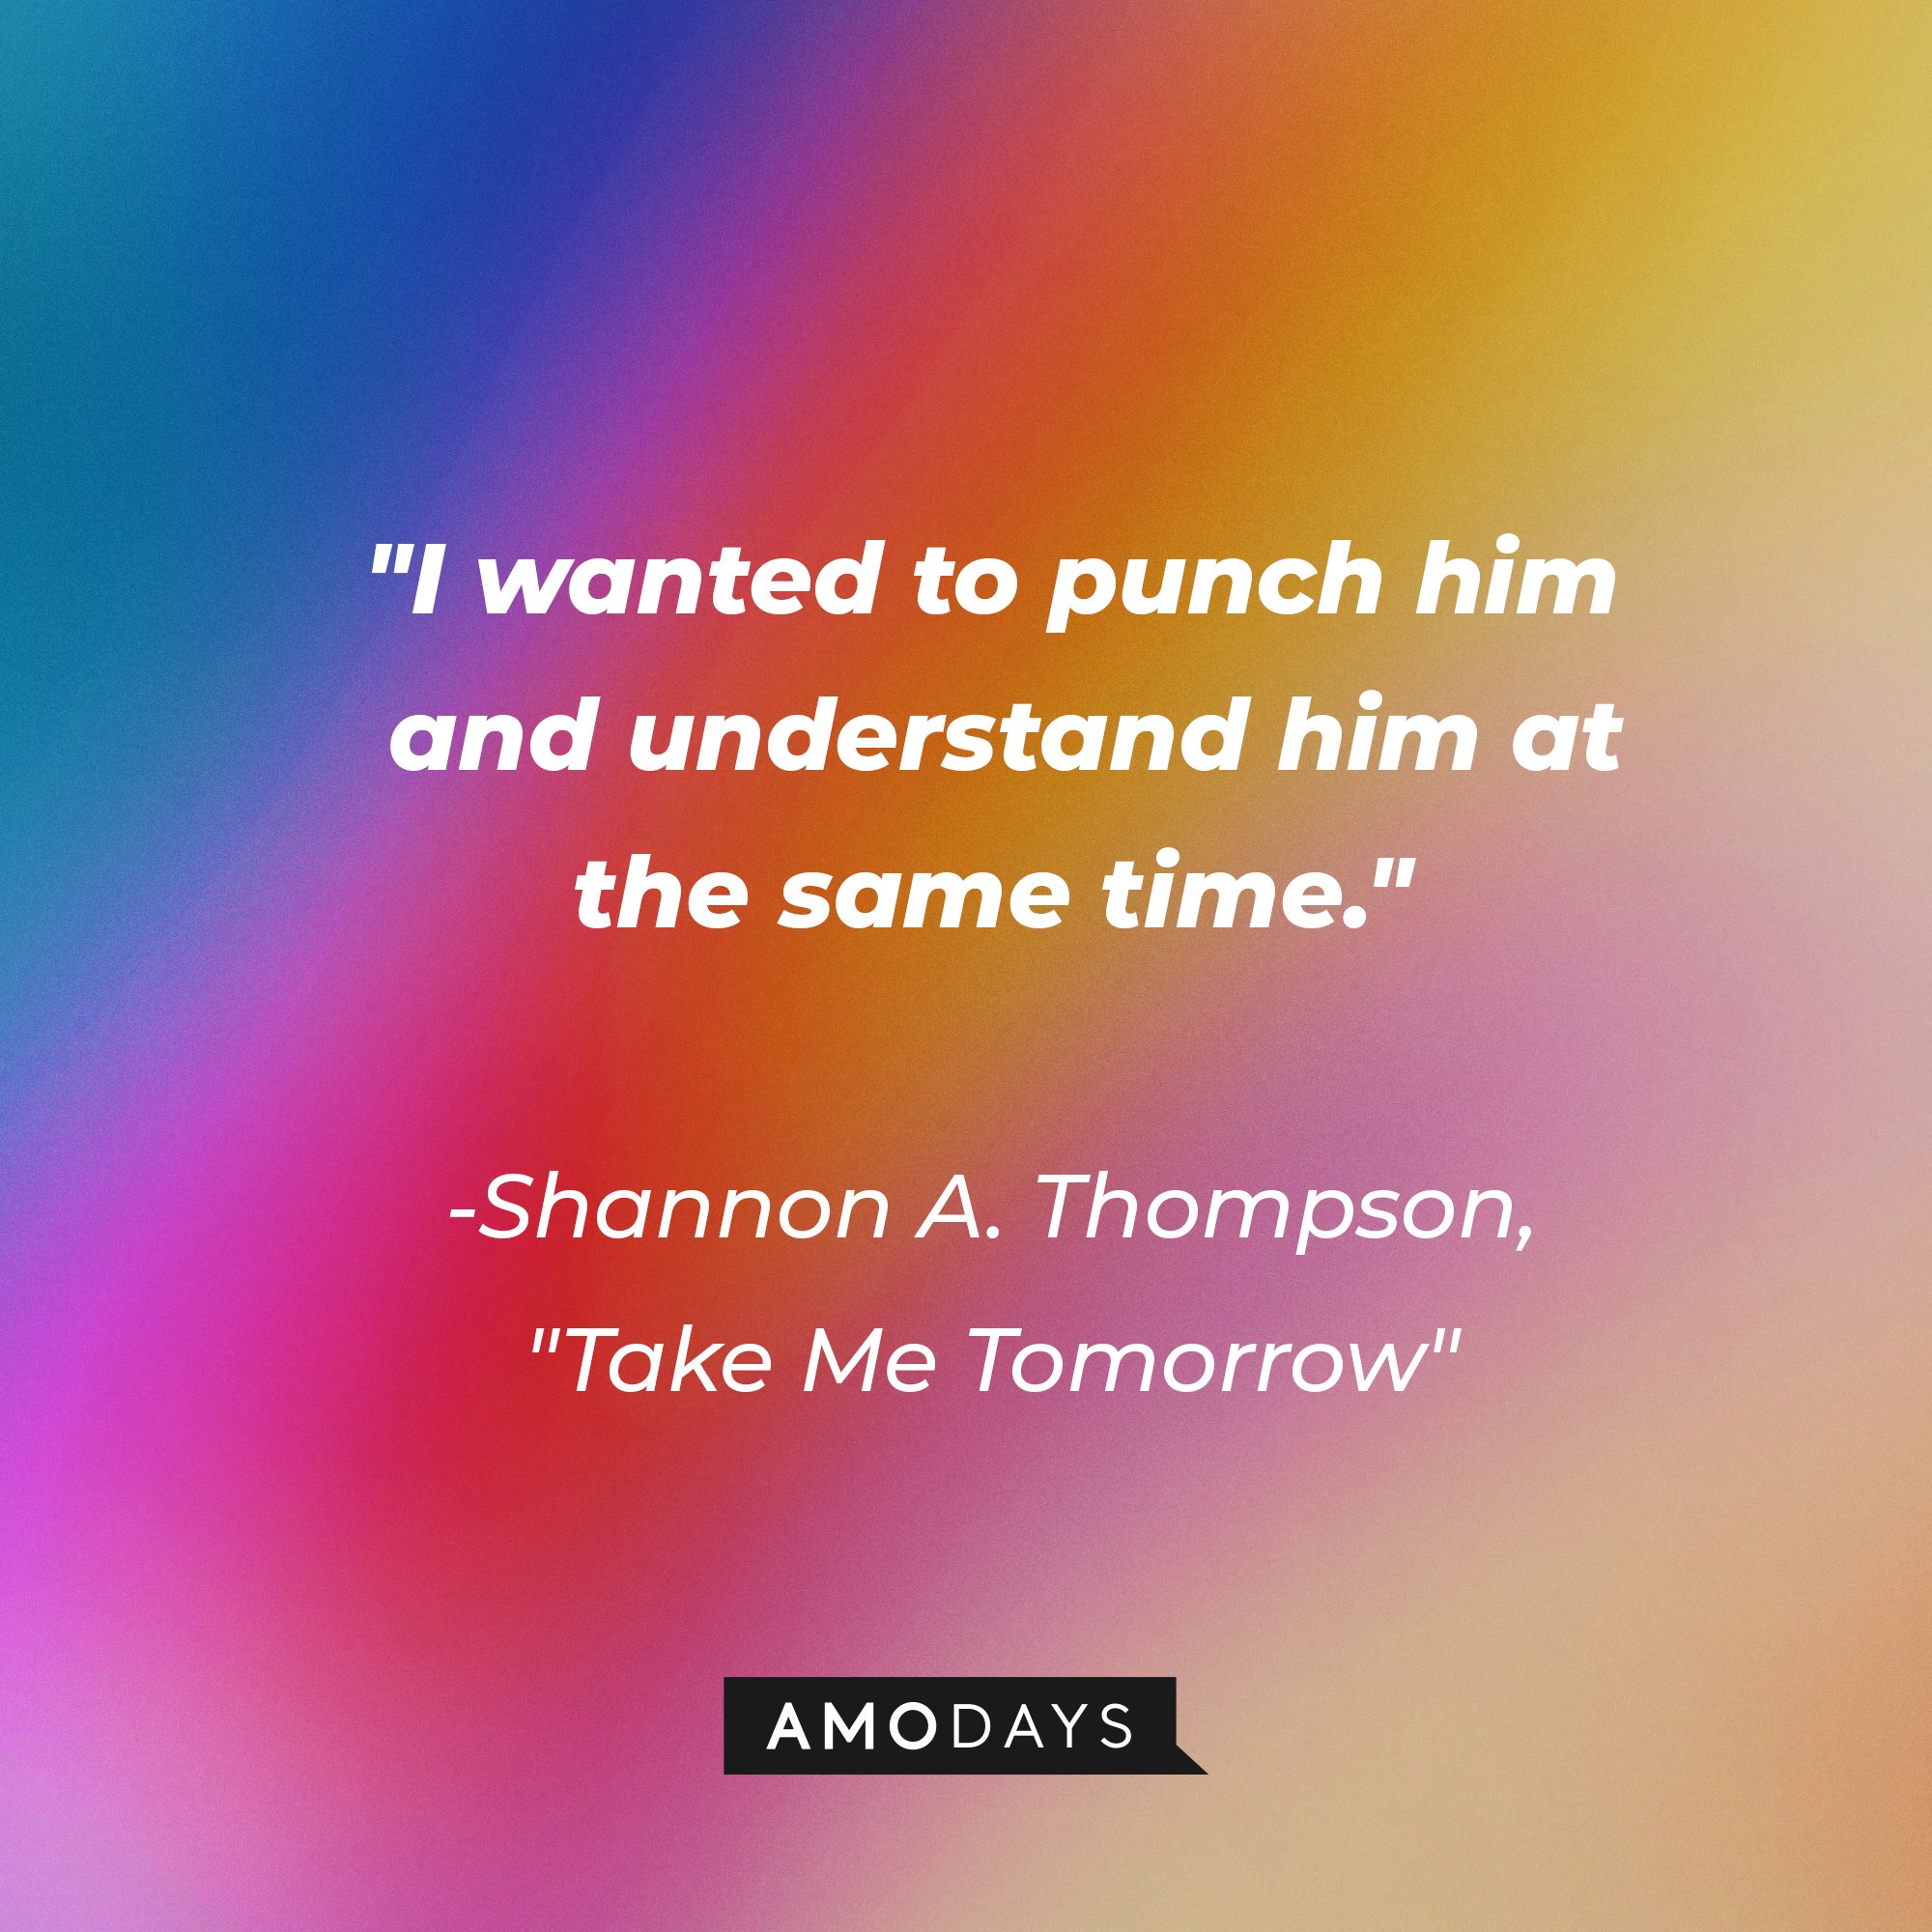 Shannon A. Thompson's "Take Me Tomorrow" quote: "I wanted to punch him and understand him at the same time." | Image: AmoDays